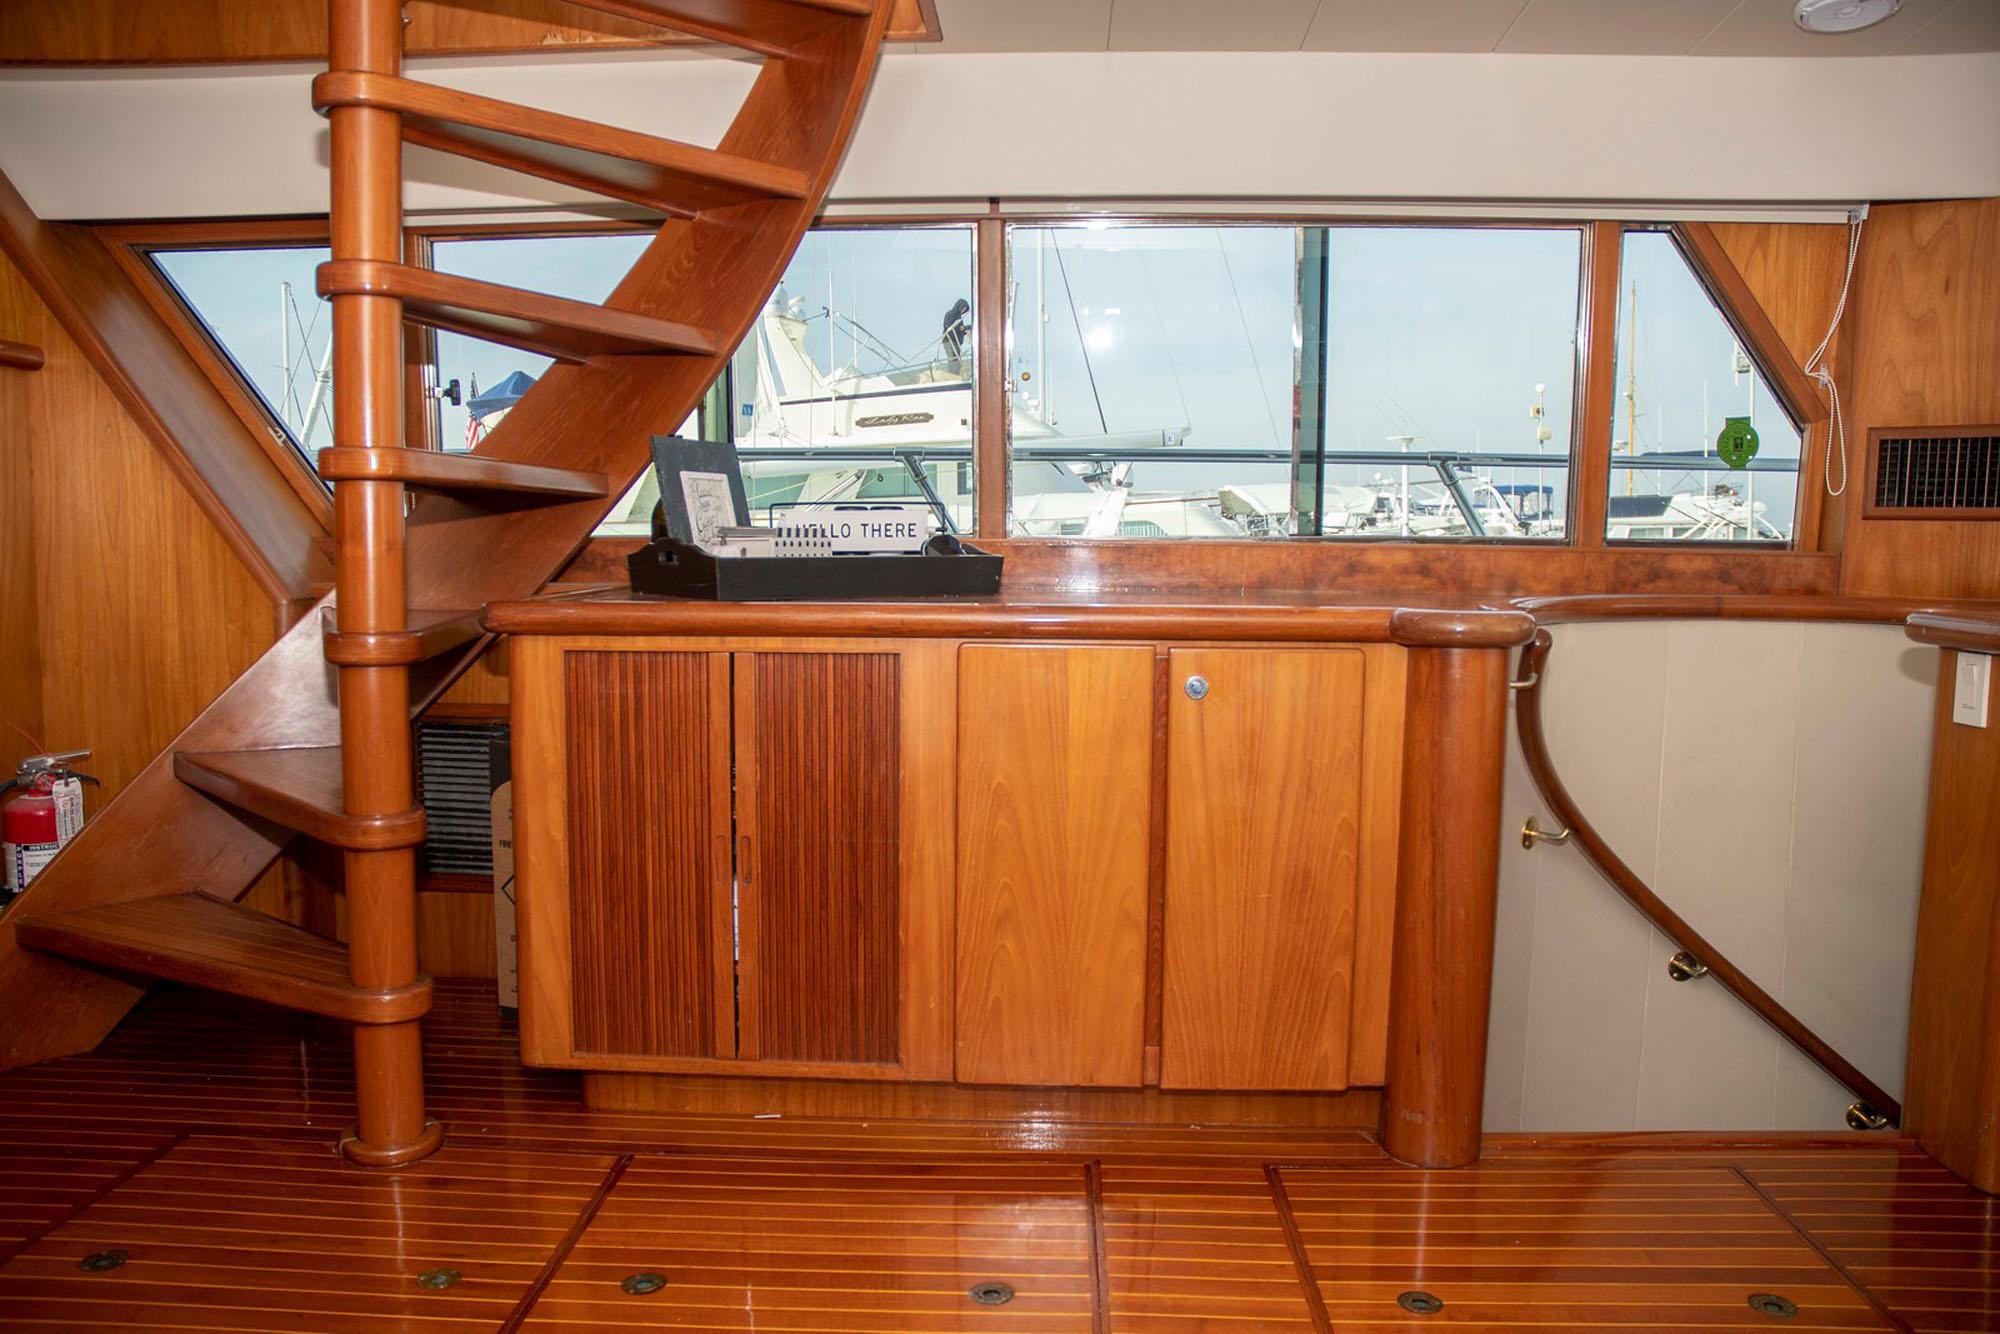 Wet Bar Area to Starboard